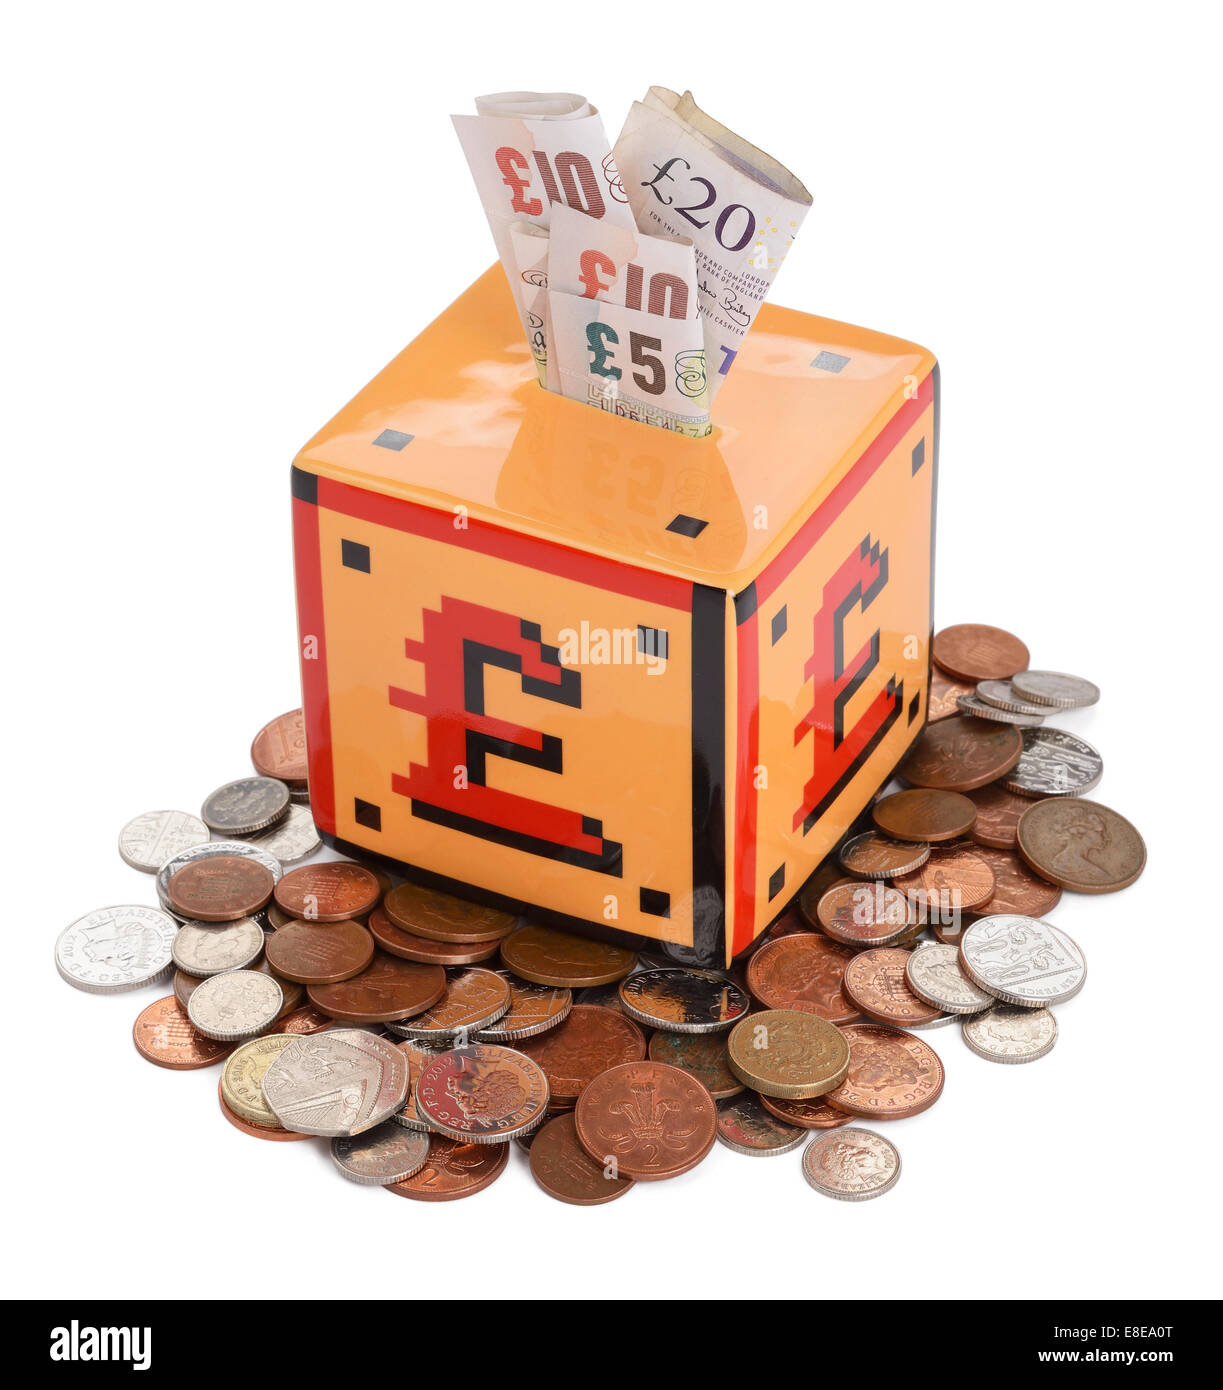 Money box with UK sterling coins and notes Stock Photo